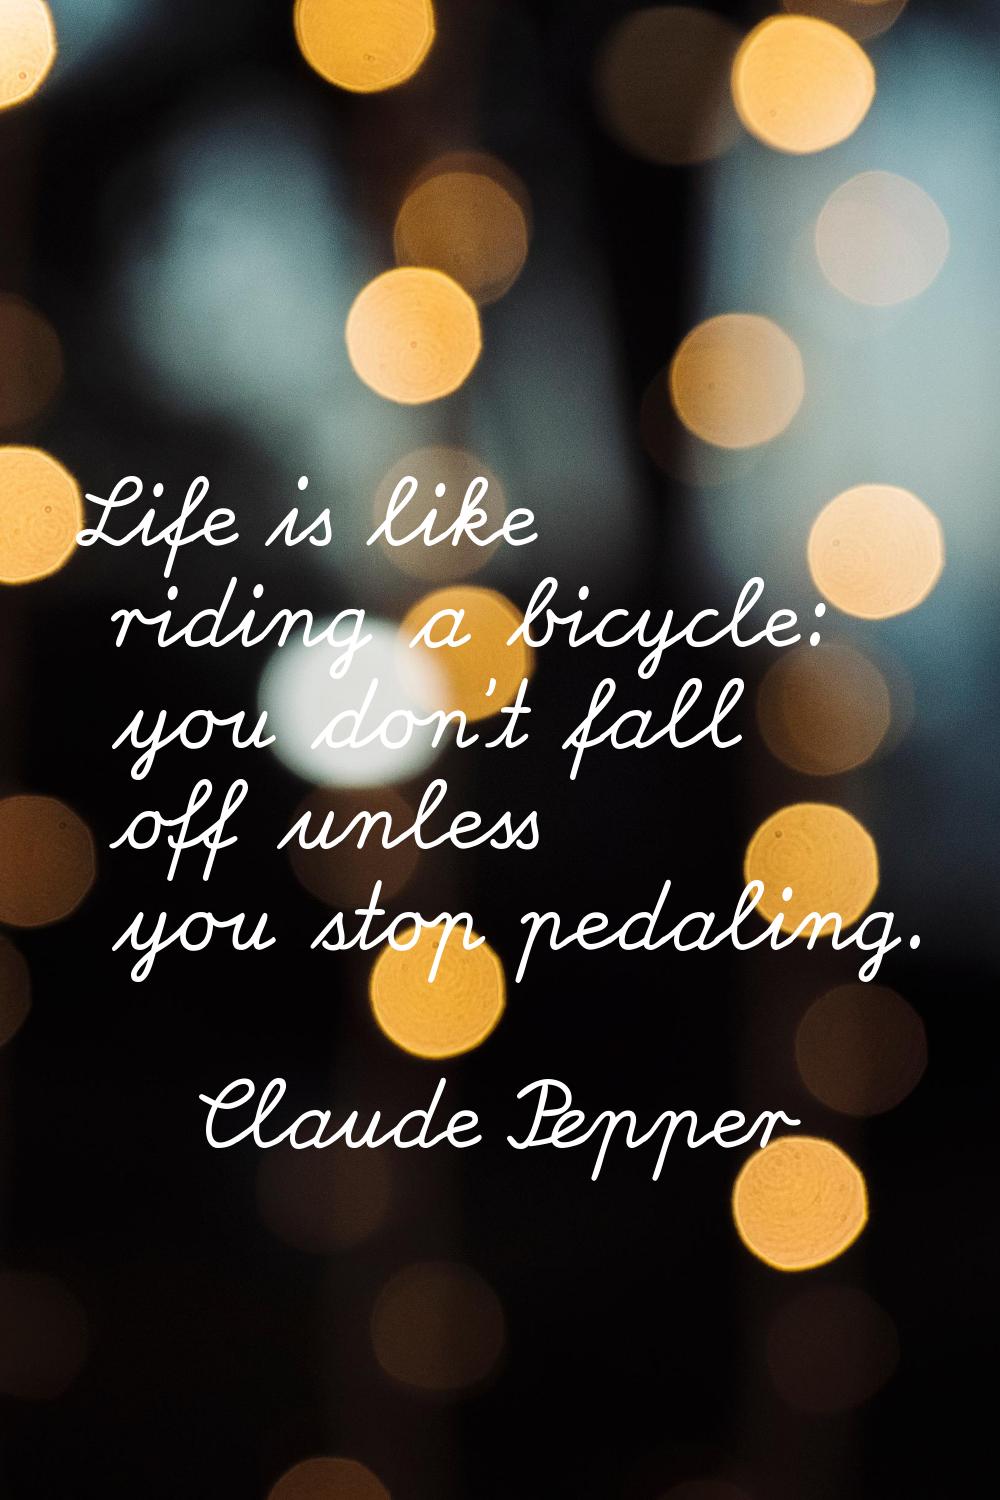 Life is like riding a bicycle: you don't fall off unless you stop pedaling.